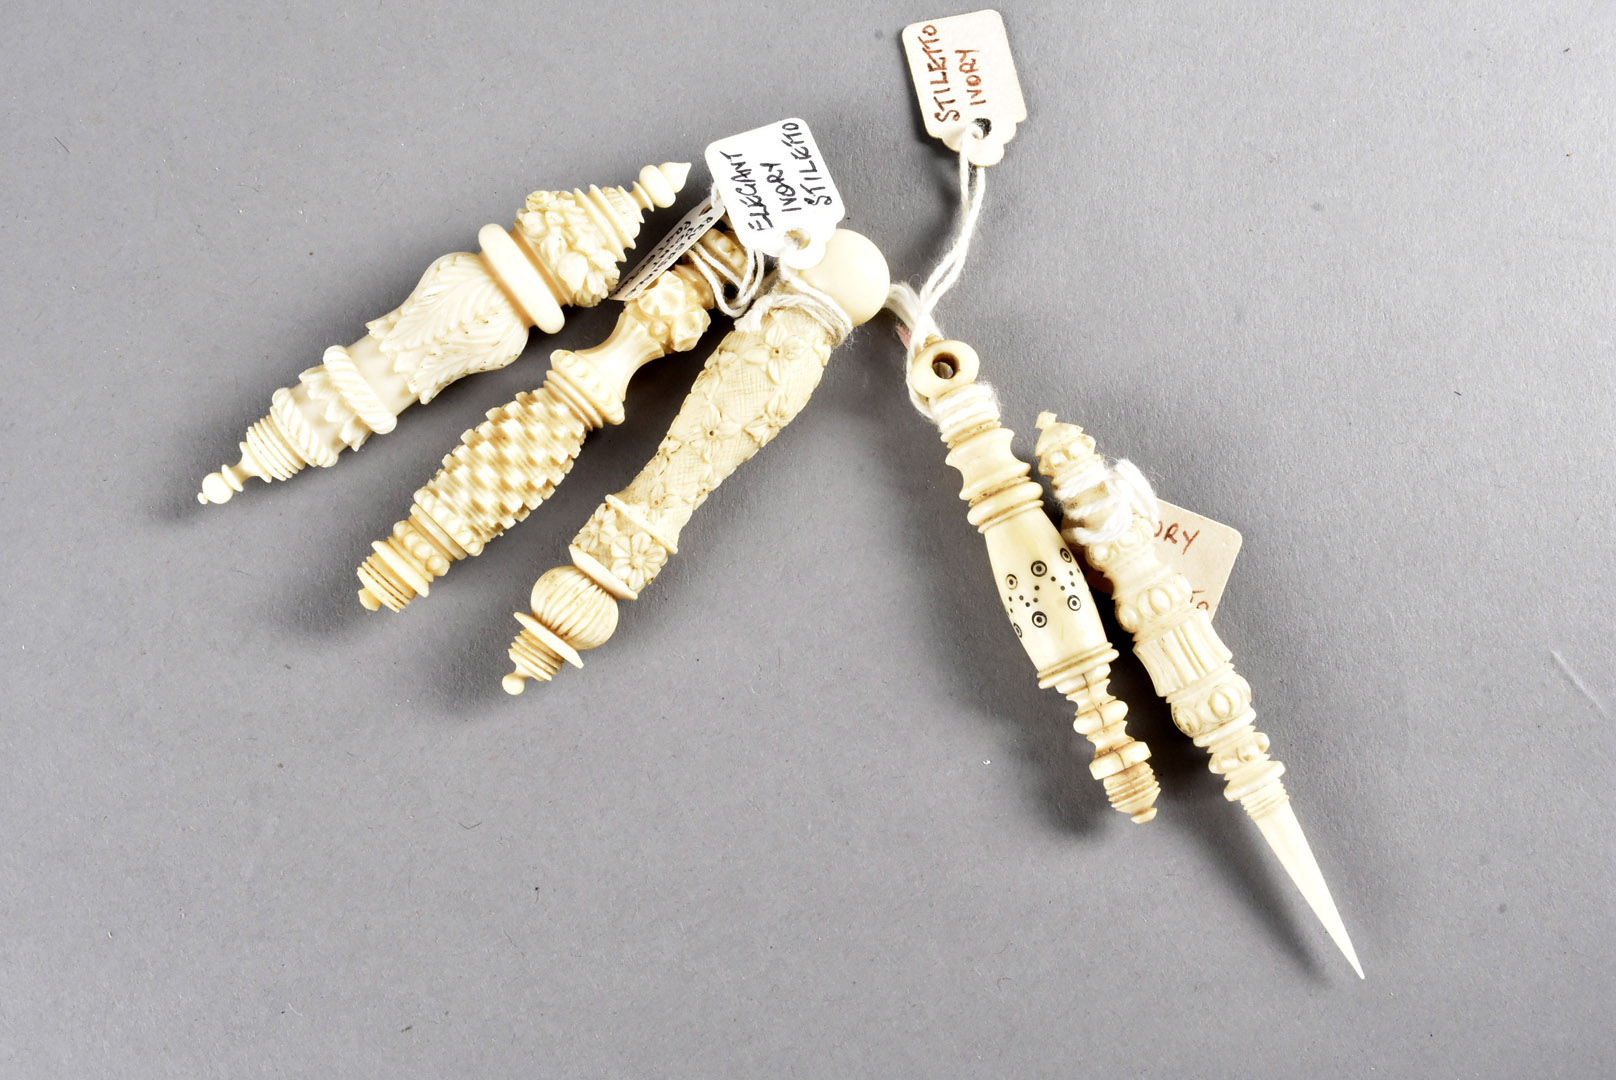 Five 19th Century ornate carved ivory lace makers stilettos, all with reversible point carved with